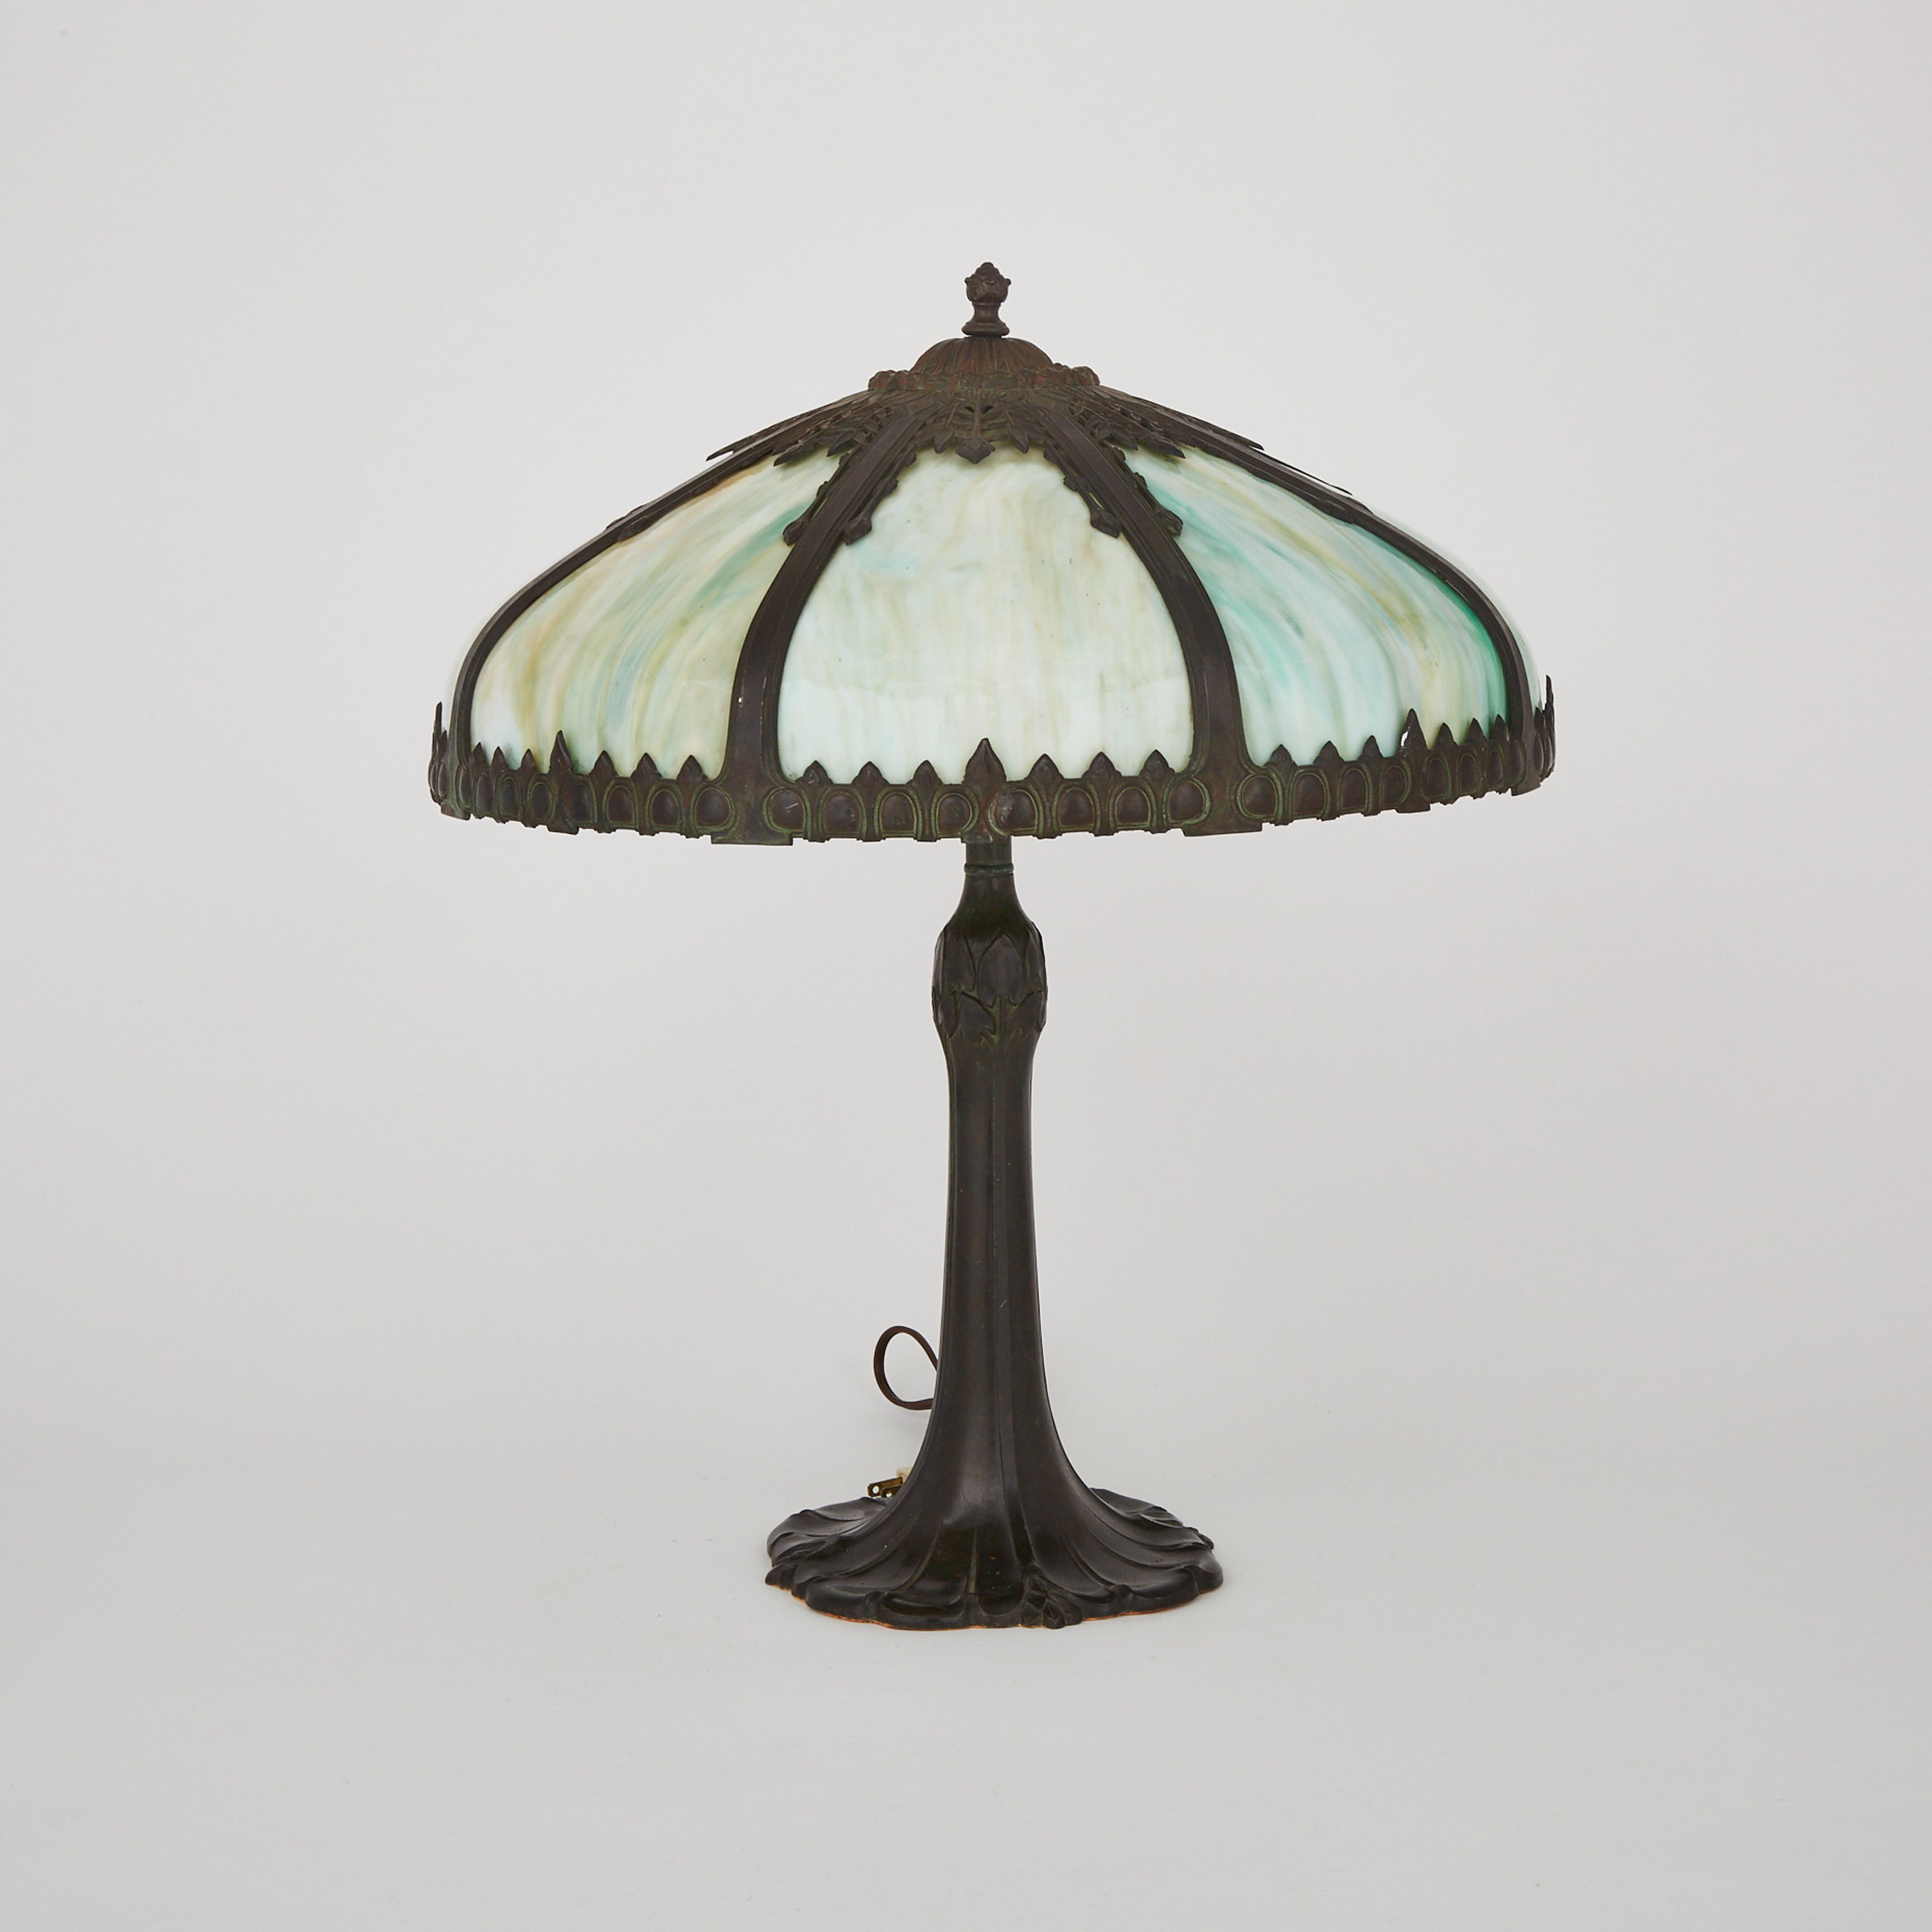 American Slag Glass Table Lamp, early 20th century